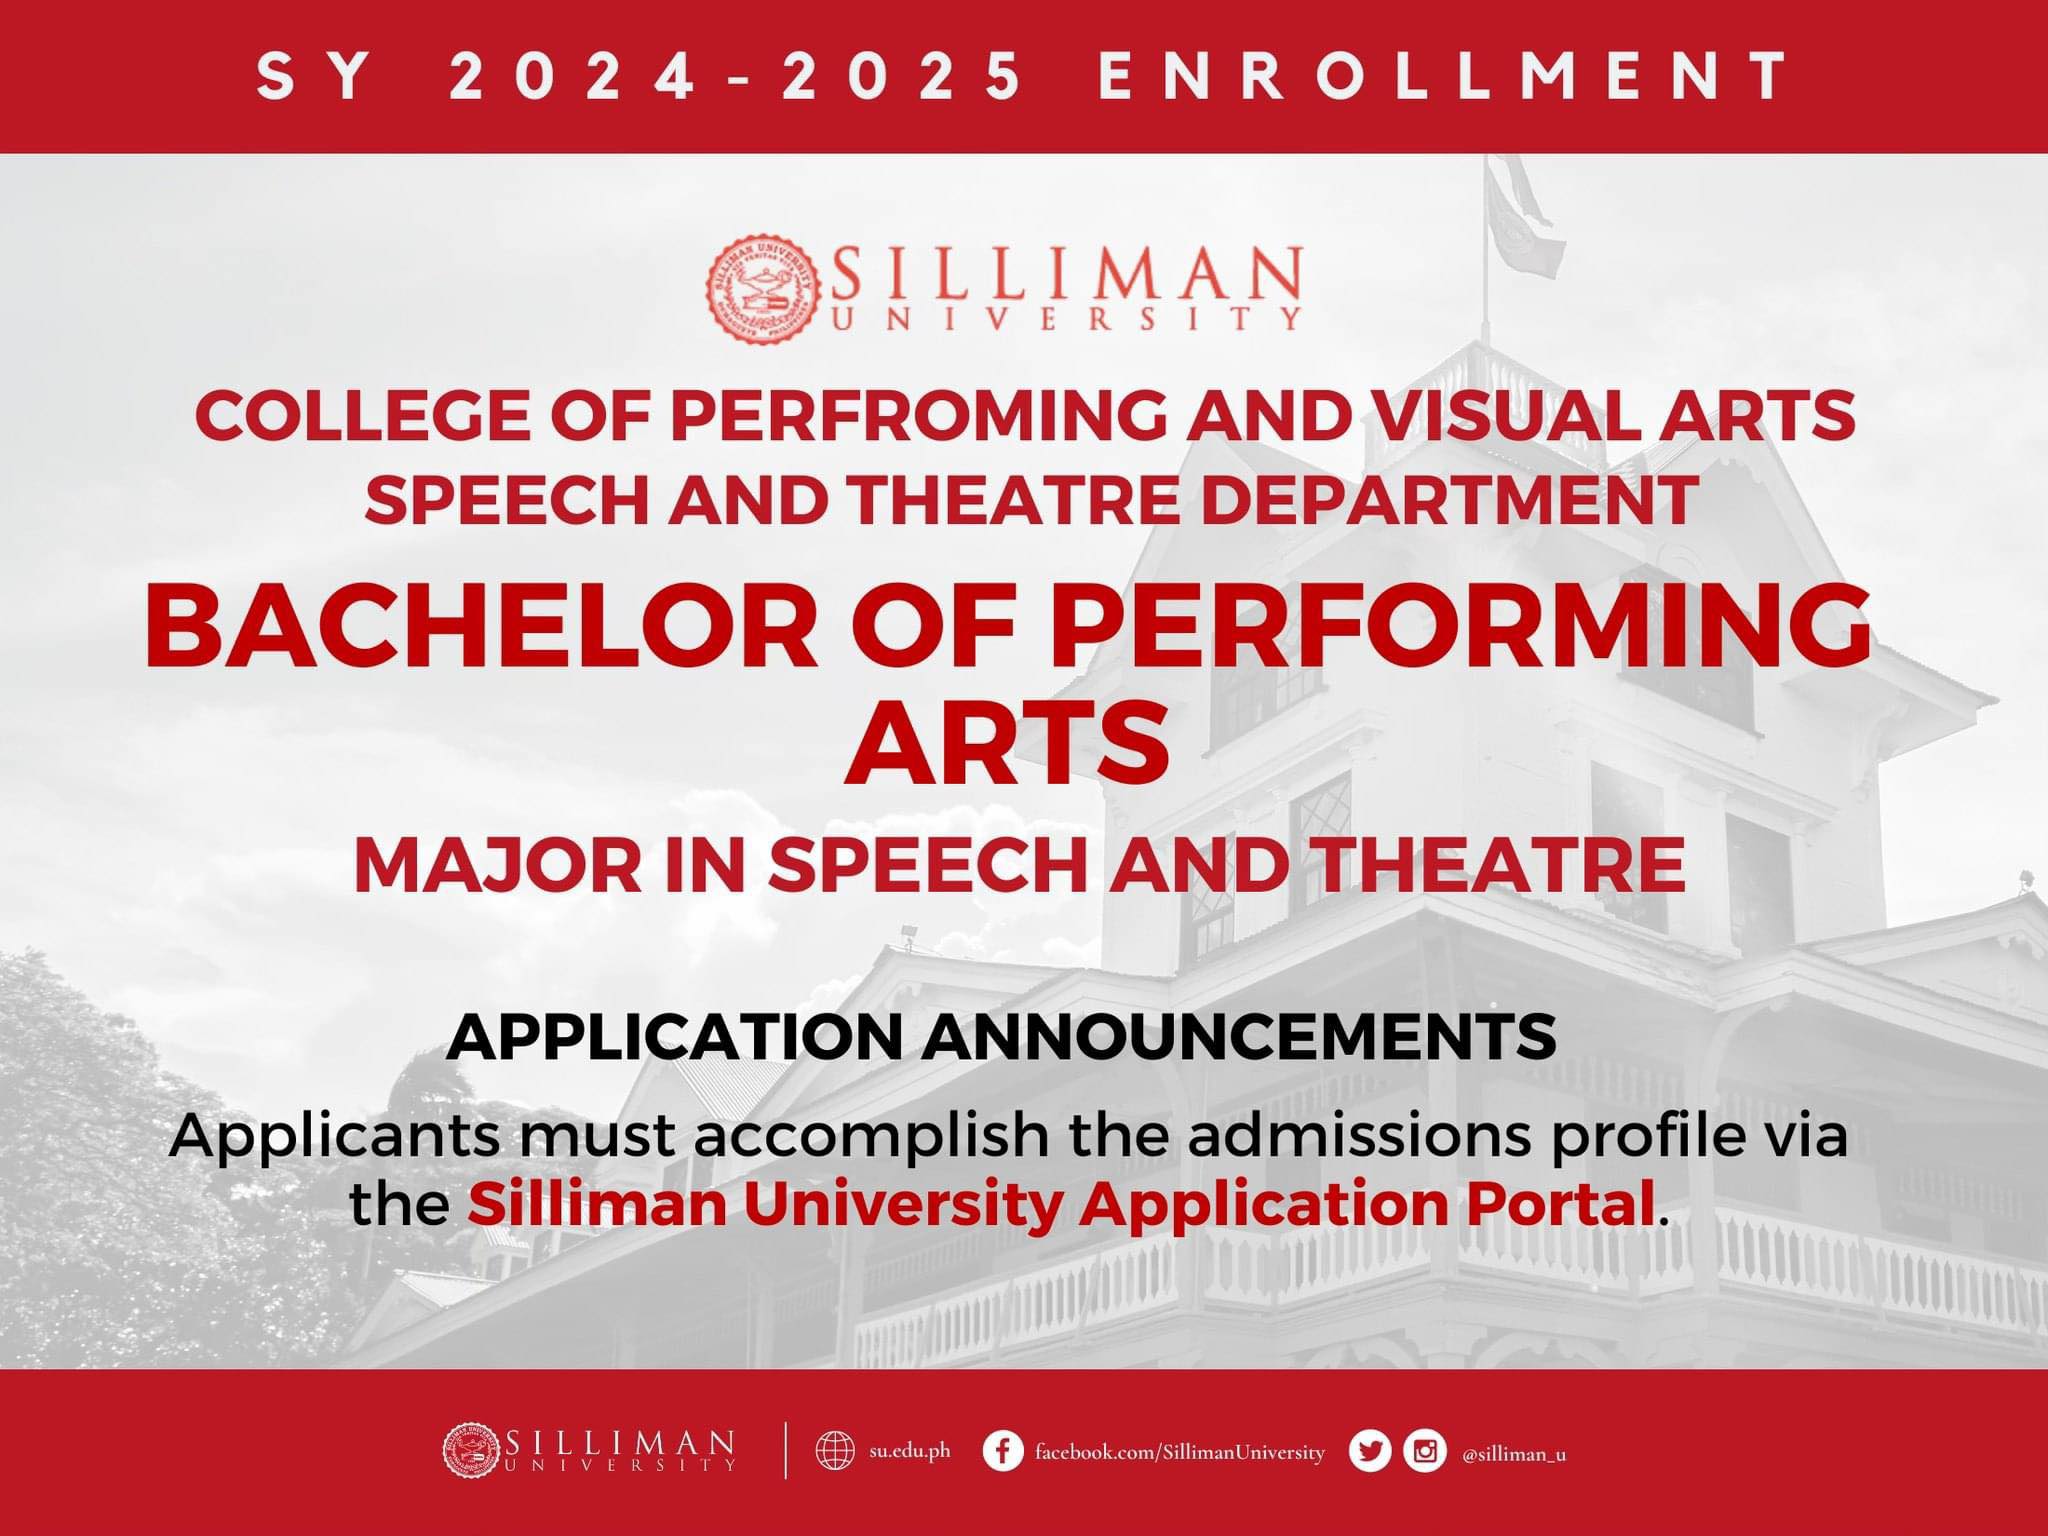 College of Performing & Visual Arts (COPVA) Major in Speech and Theatre is announcing its General Admission Guidelines for SY 2024-2025